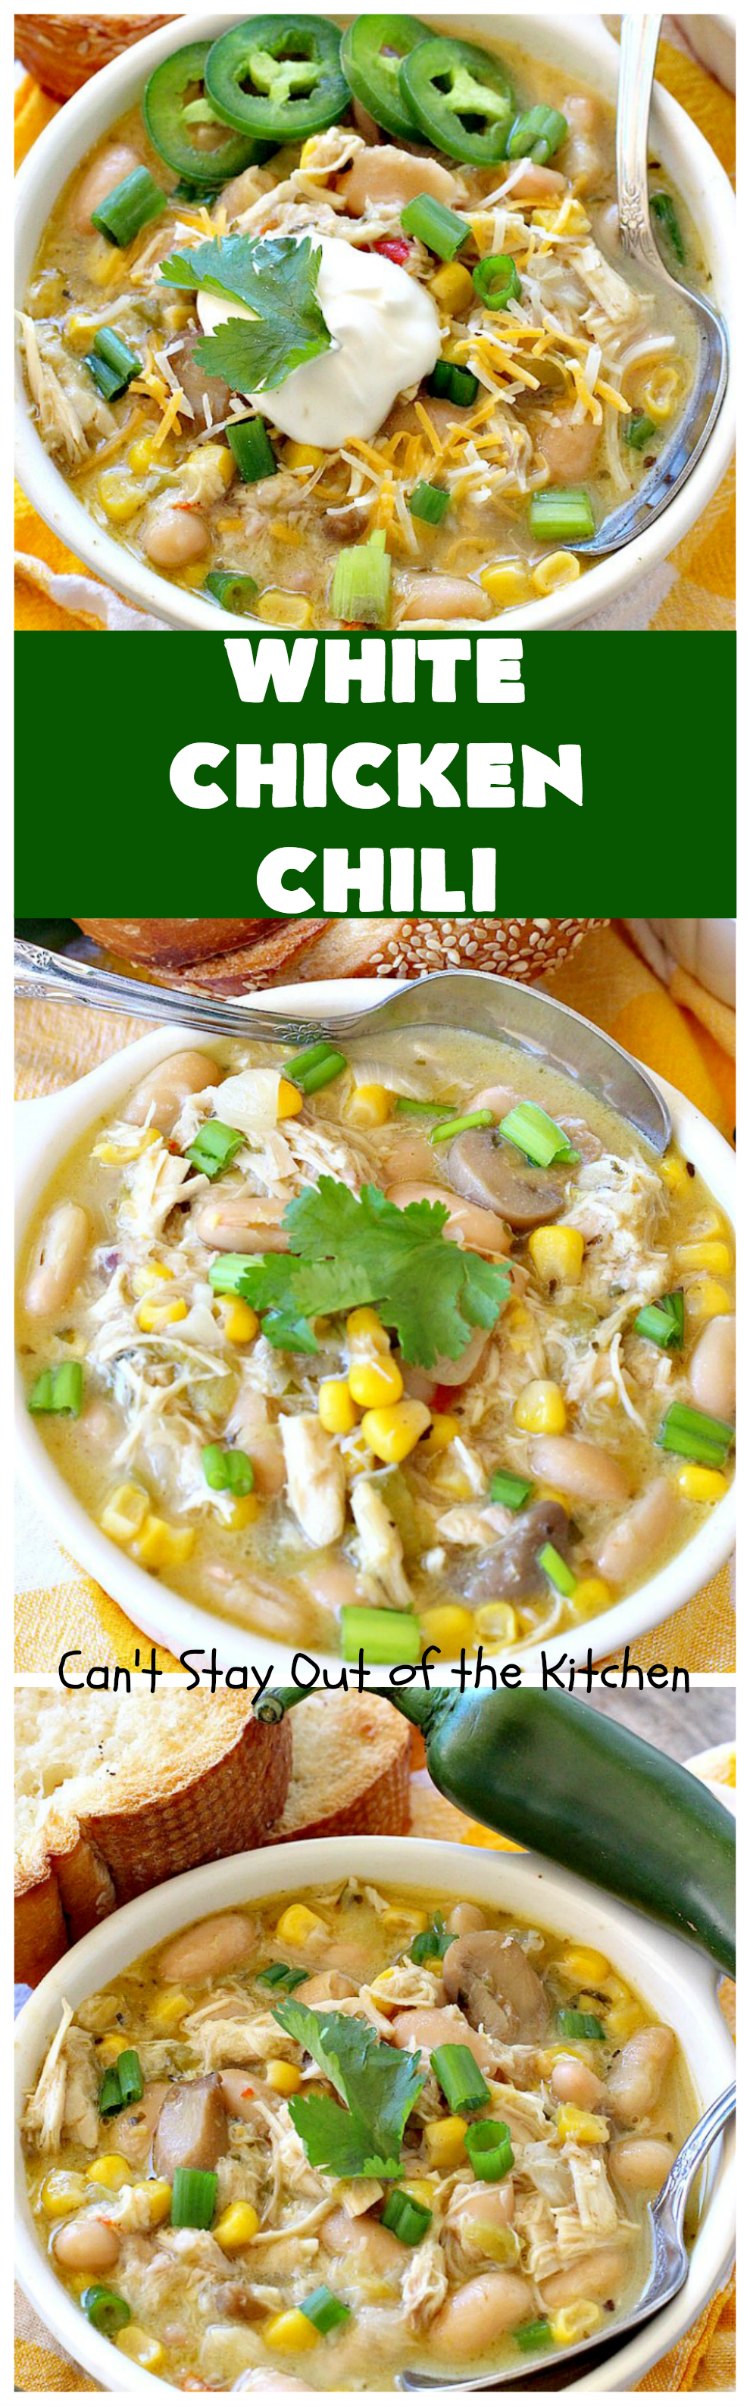 White Chicken Chili | Can't Stay Out of the Kitchen